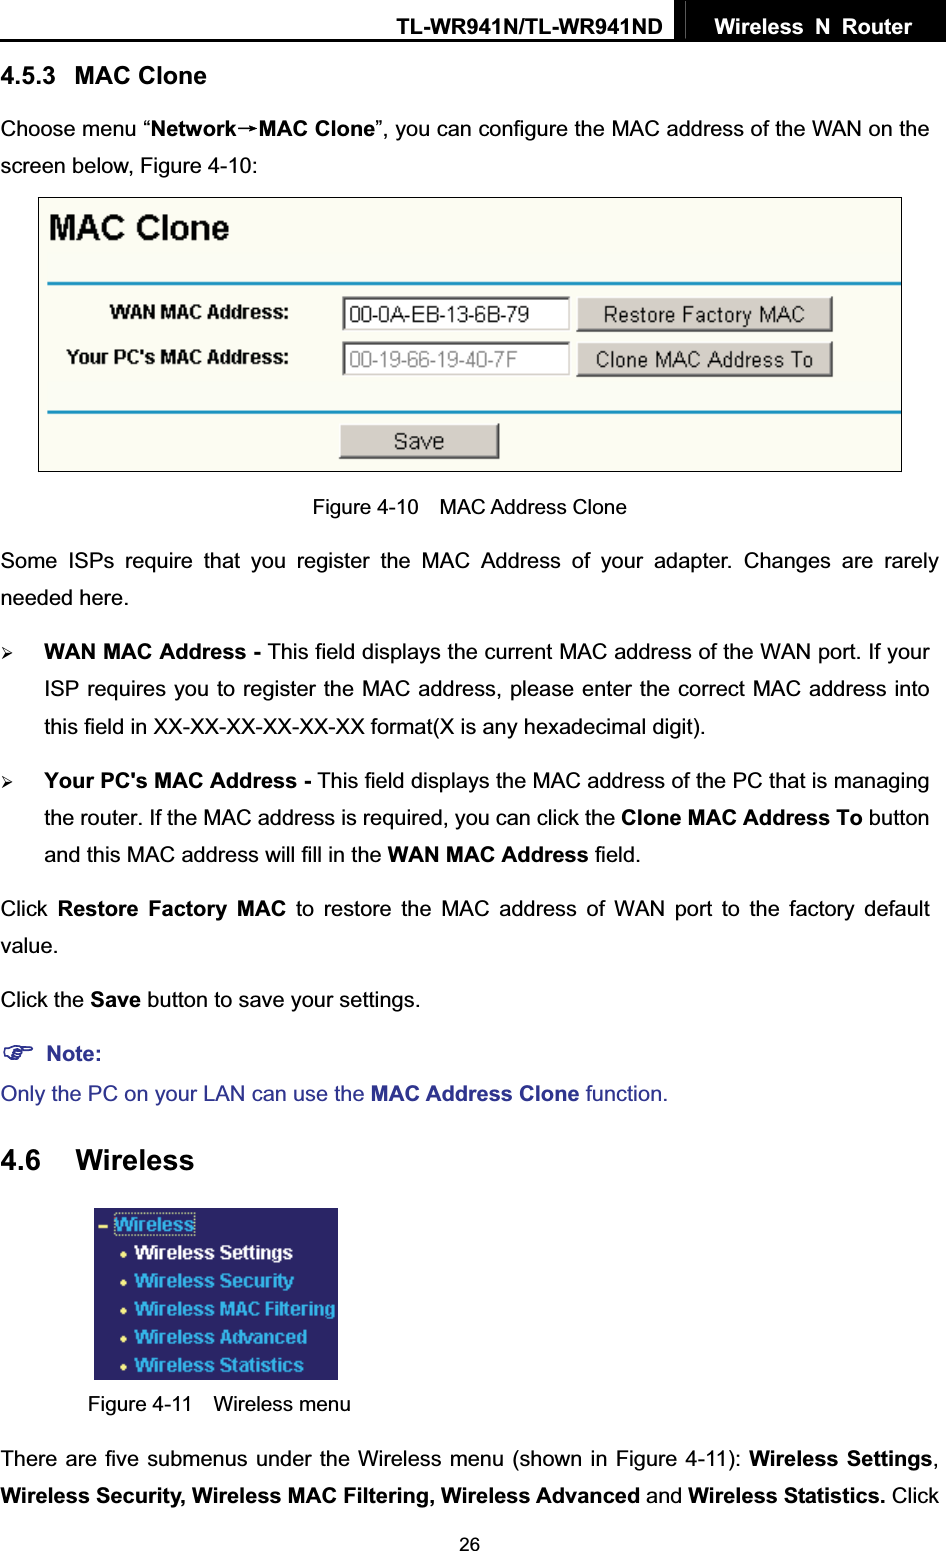 TL-WR941N/TL-WR941ND  Wireless N Router  264.5.3 MAC Clone Choose menu “NetworkėMAC Clone”, you can configure the MAC address of the WAN on the screen below, Figure 4-10: Figure 4-10  MAC Address CloneSome ISPs require that you register the MAC Address of your adapter. Changes are rarely needed here. ¾WAN MAC Address - This field displays the current MAC address of the WAN port. If your ISP requires you to register the MAC address, please enter the correct MAC address into this field in XX-XX-XX-XX-XX-XX format(X is any hexadecimal digit).   ¾Your PC&apos;s MAC Address - This field displays the MAC address of the PC that is managing the router. If the MAC address is required, you can click the Clone MAC Address To button and this MAC address will fill in the WAN MAC Address field. Click Restore Factory MAC to restore the MAC address of WAN port to the factory default value.Click the Save button to save your settings. )Note:Only the PC on your LAN can use the MAC Address Clone function. 4.6 Wireless Figure 4-11  Wireless menu There are five submenus under the Wireless menu (shown in Figure 4-11): Wireless Settings,Wireless Security, Wireless MAC Filtering, Wireless Advanced and Wireless Statistics. Click